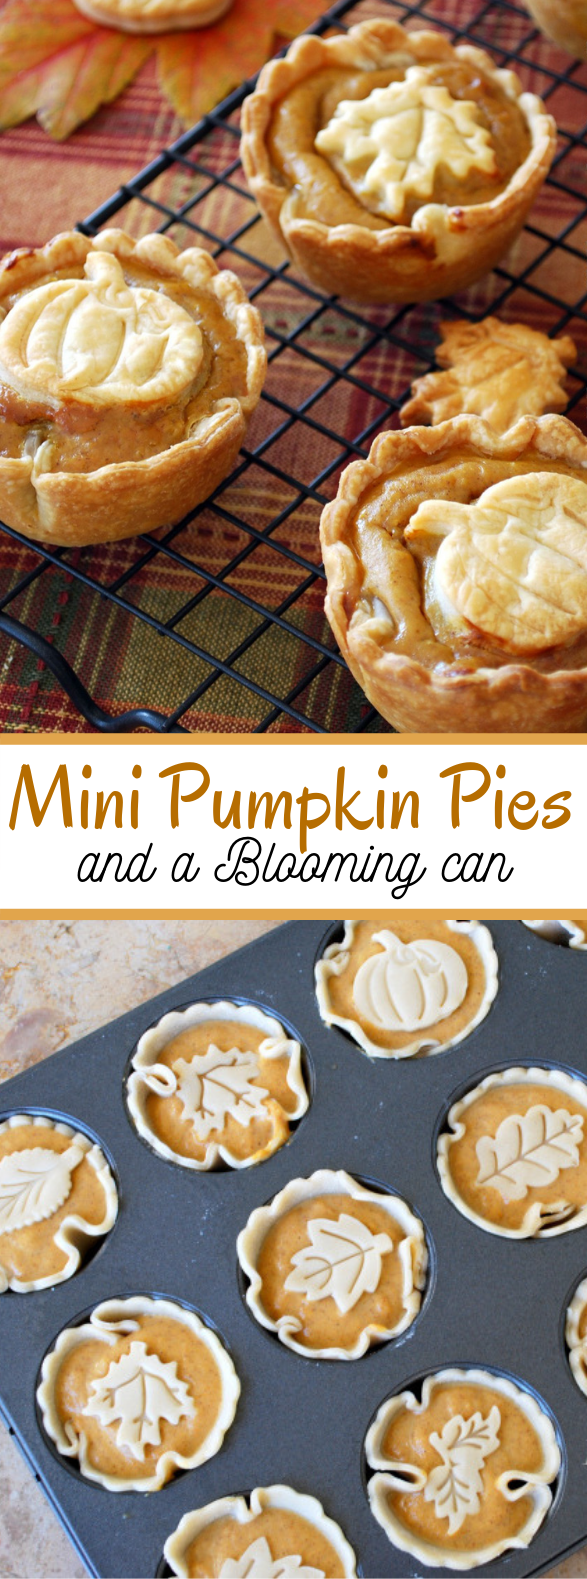 Mini Pumpkin Pies and a Blooming Can #desserts #cookies